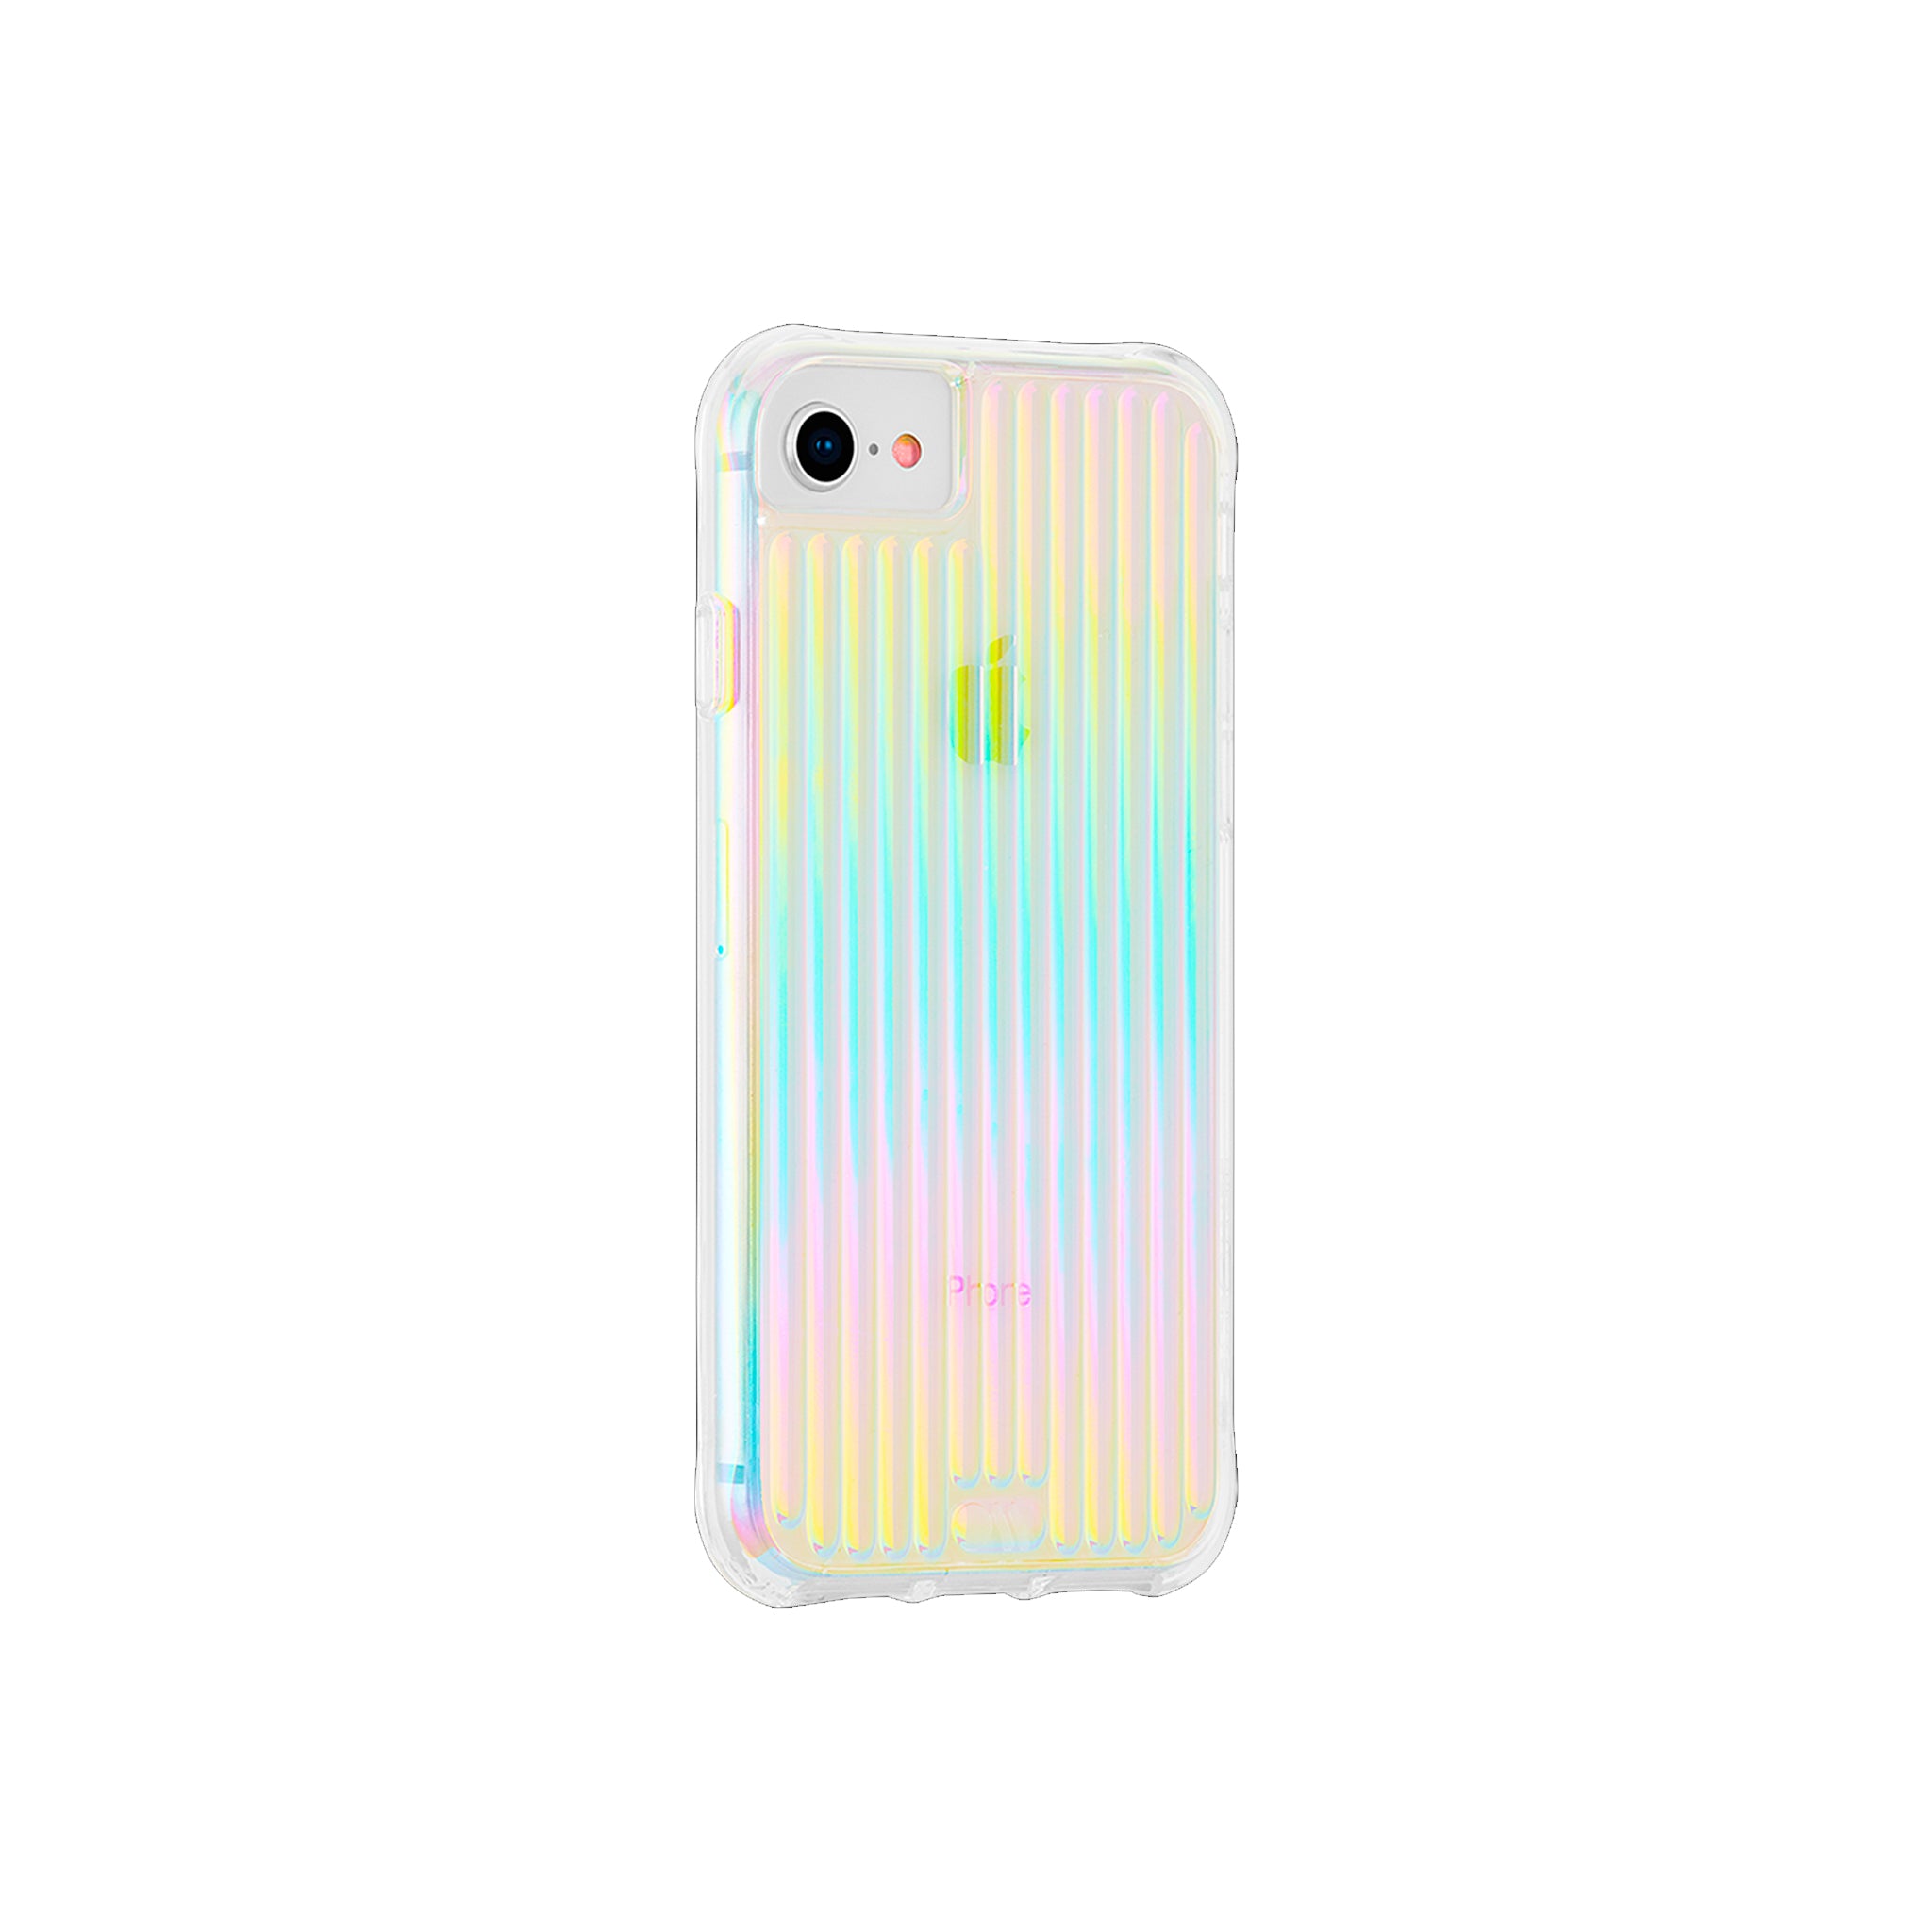 Case-mate - Tough Groove Case For Apple iPhone Se / 8 / 7 / 6s / 6 - Iridescent